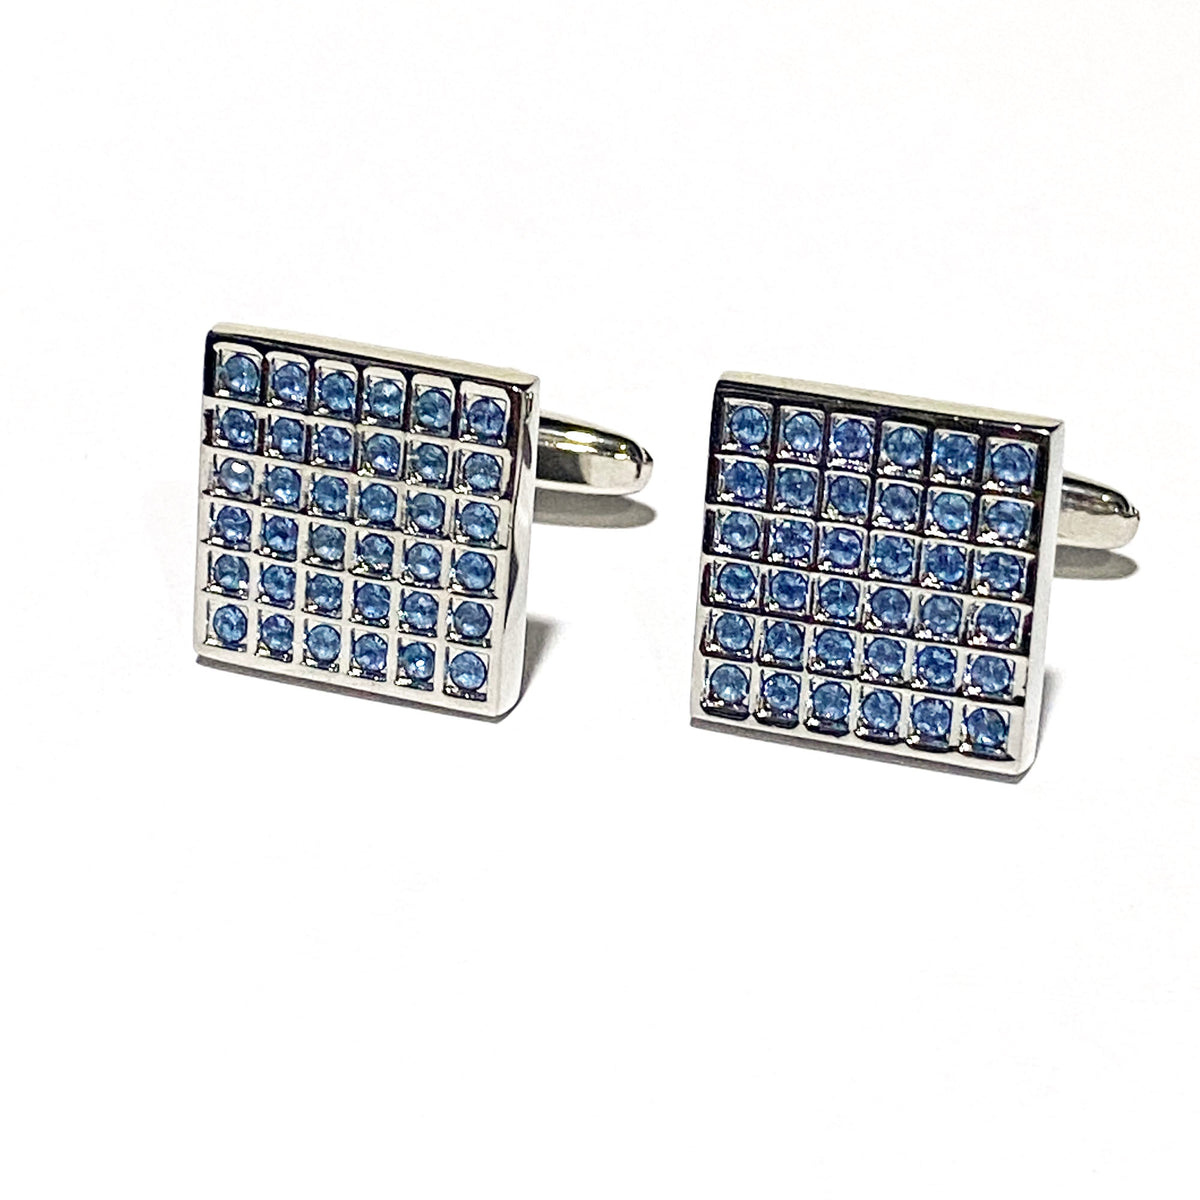 12 Blue Crystal Cufflinks Square (Online Exclusive)